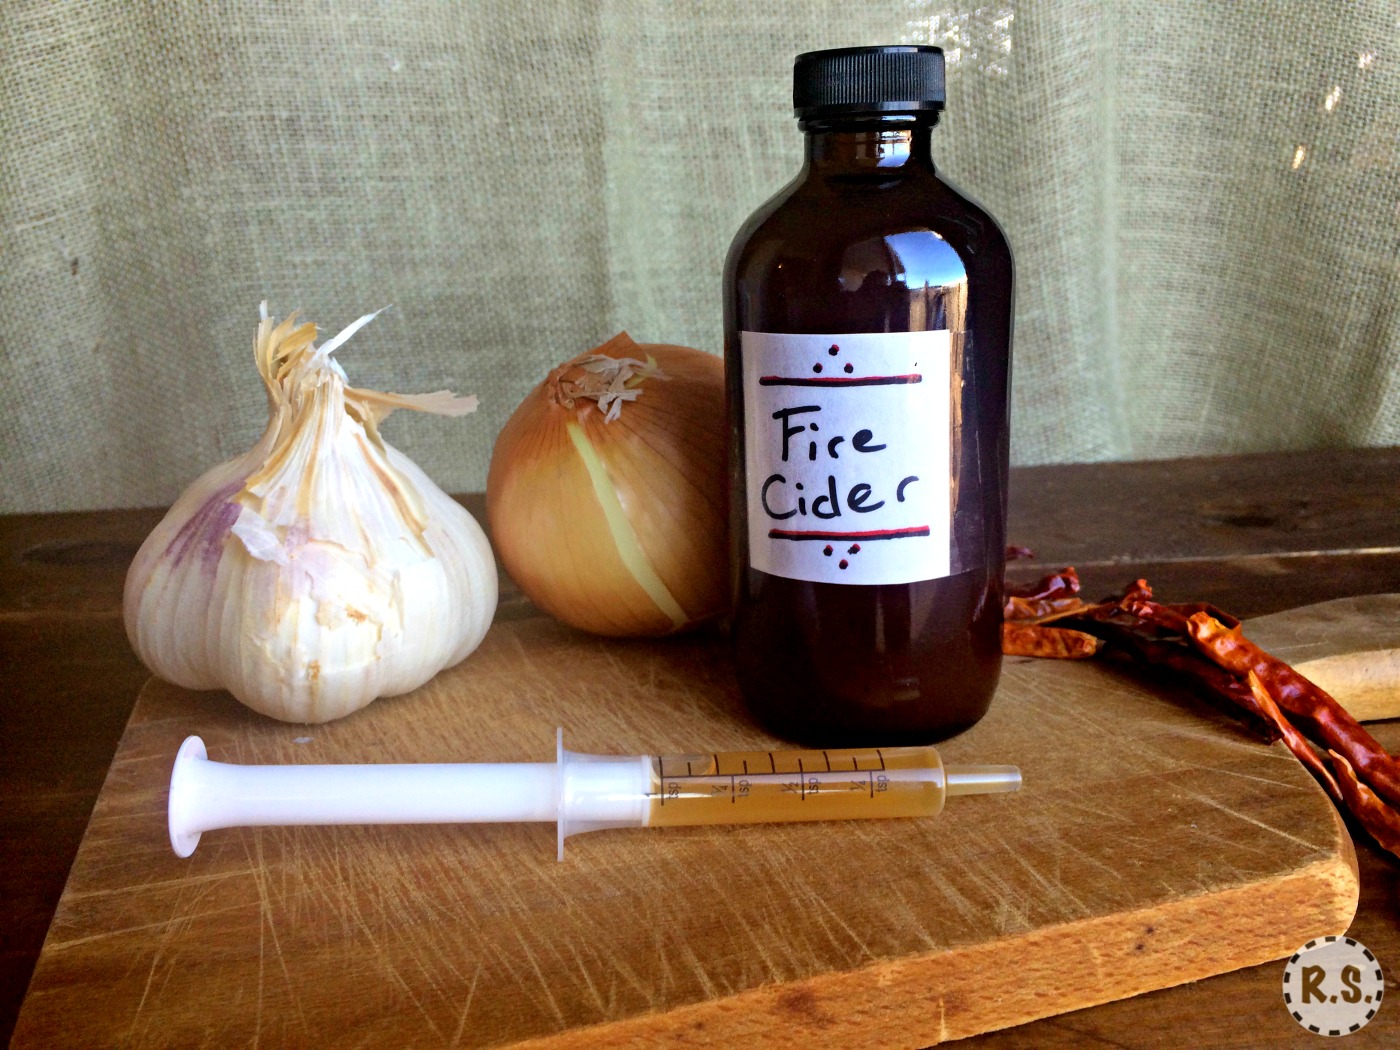 Make a powerful colds and flu remedy with this easy fire cider recipe. Take fire cider at the beginning of symptoms and stop a cold before it starts! An instant fire cider option is included too.